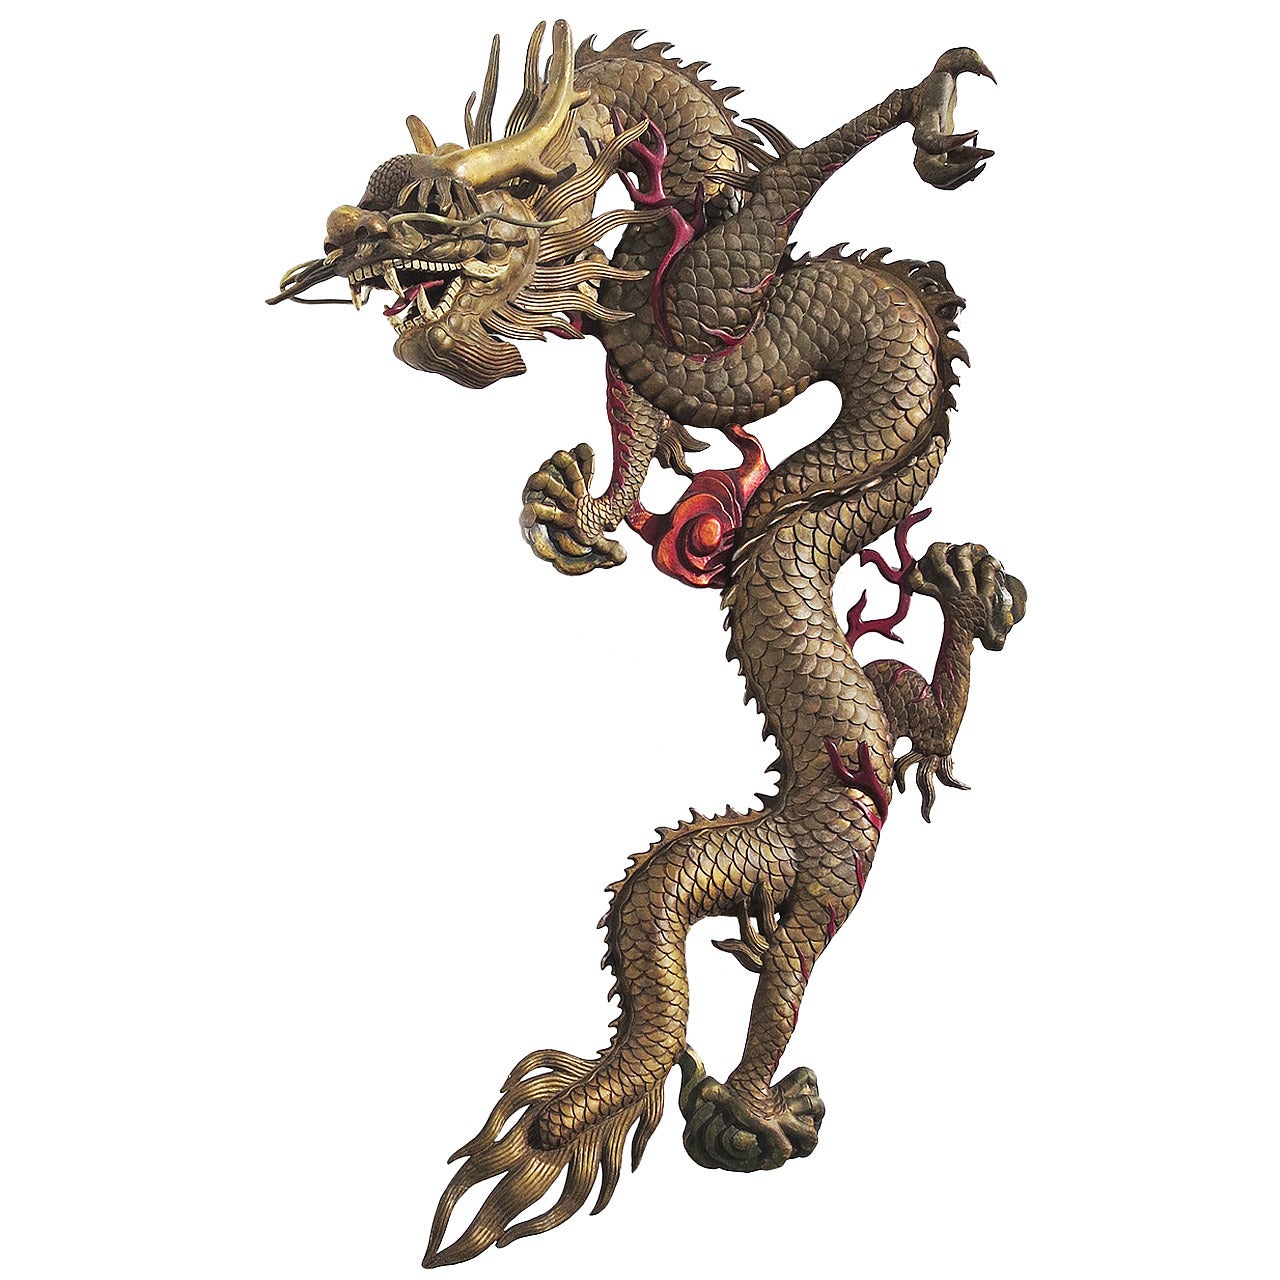 Grand Scale Carved Wooden Dragon Wall Hanging Sculpture